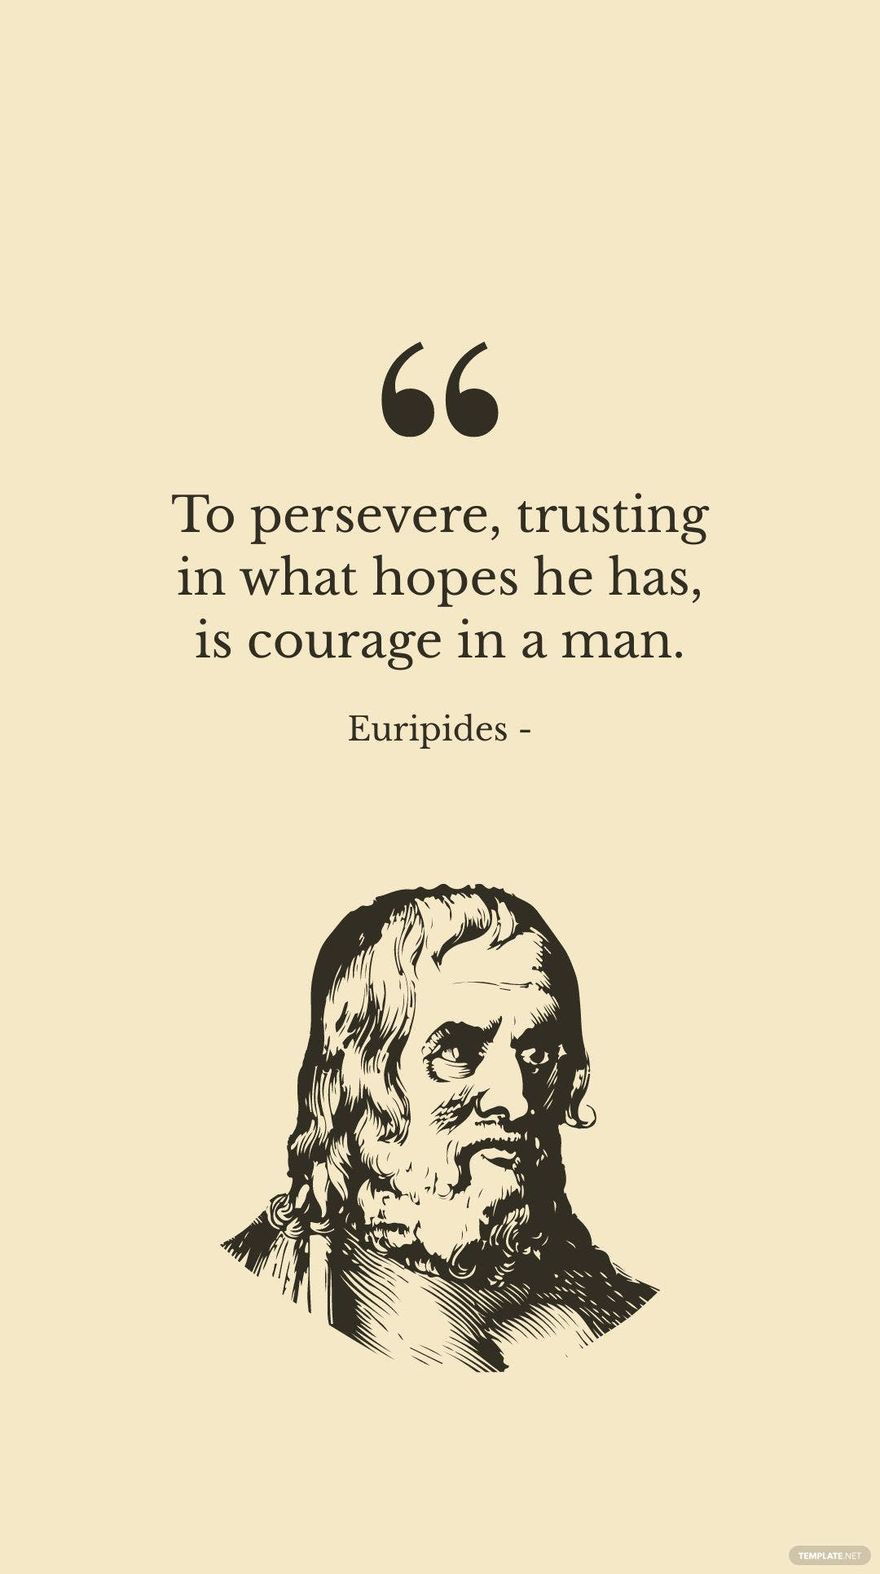 Free Euripides - To persevere, trusting in what hopes he has, is courage in a man. in JPG